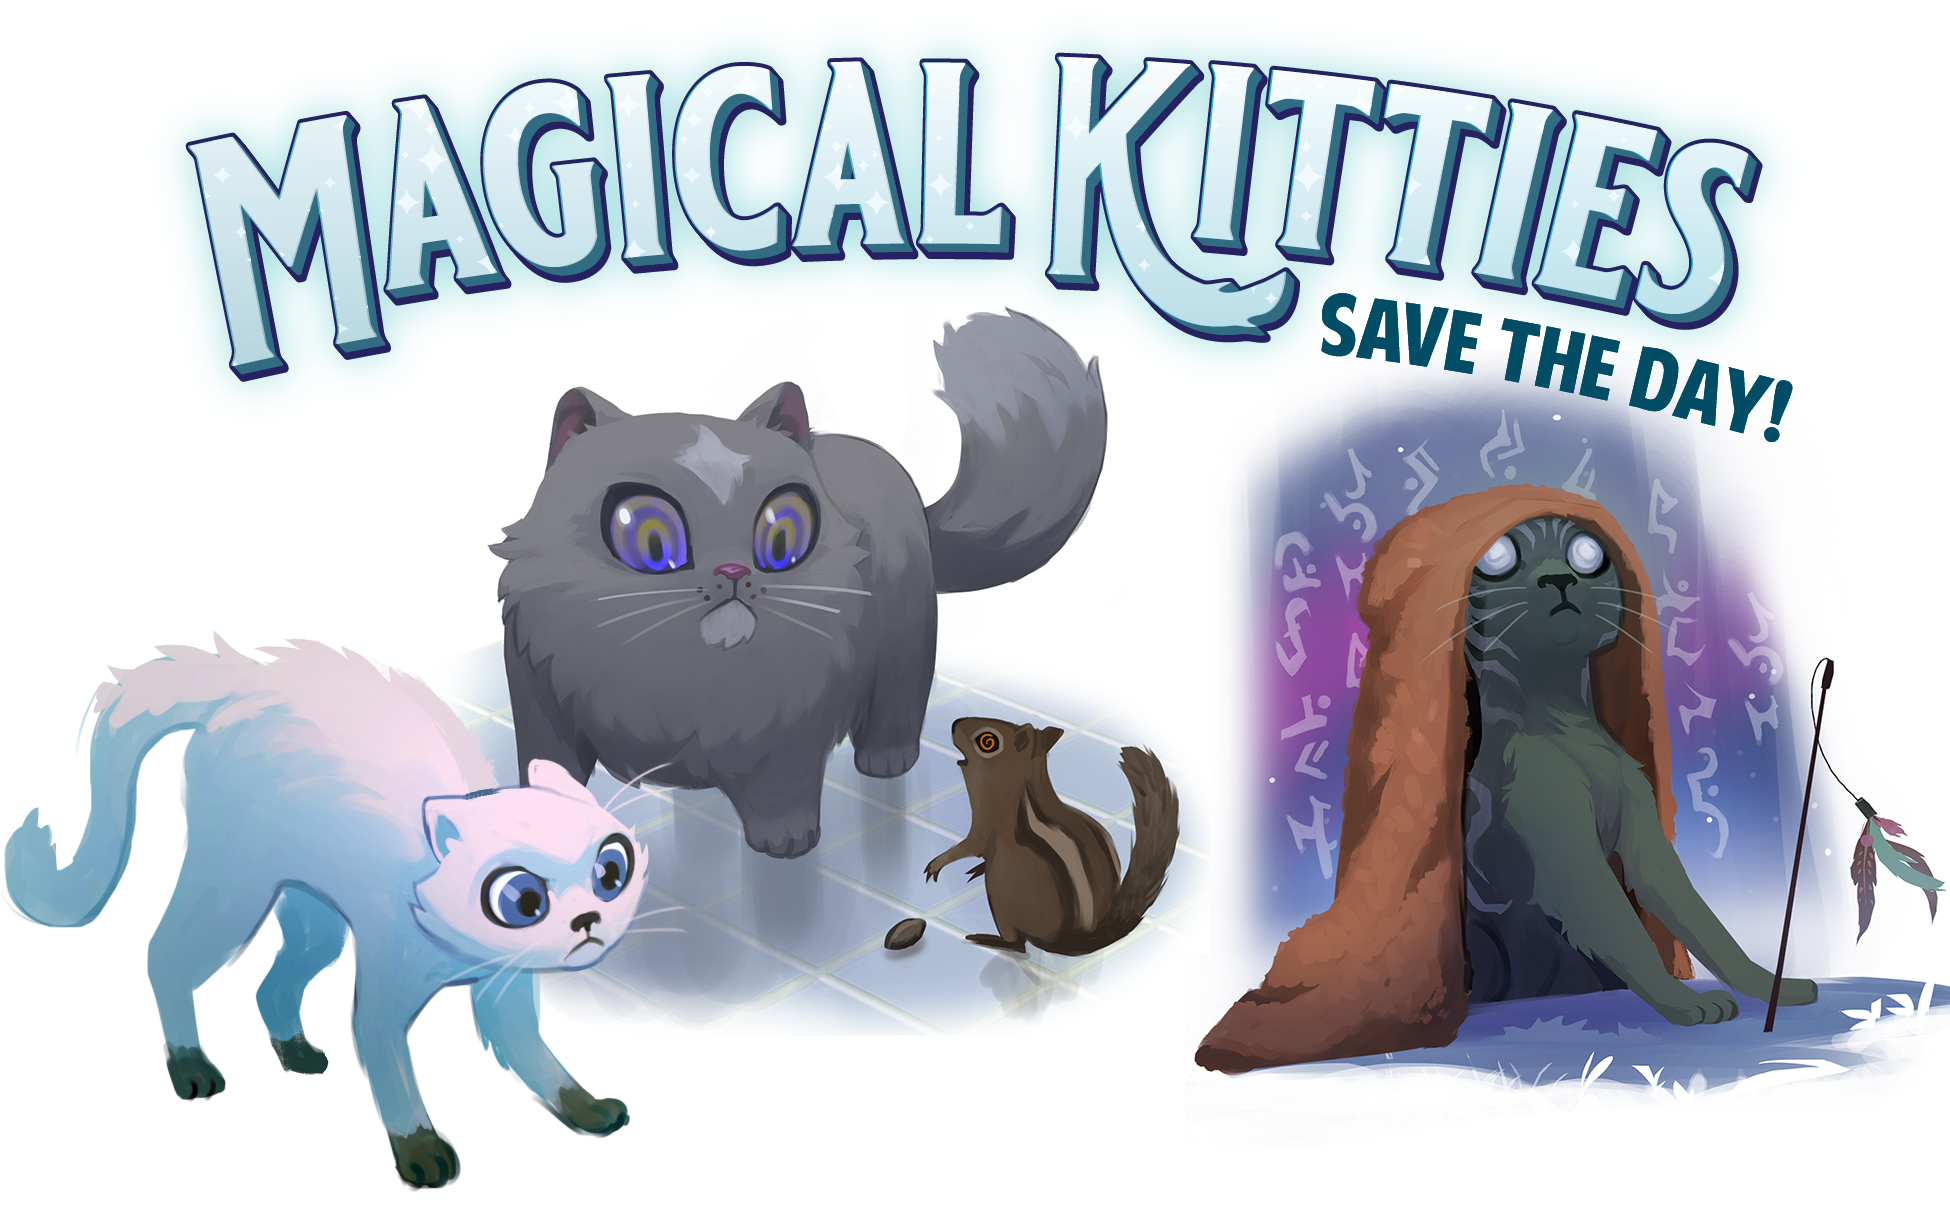 Launched & Funded on Kickstarter: Magical Kitties Save the Day